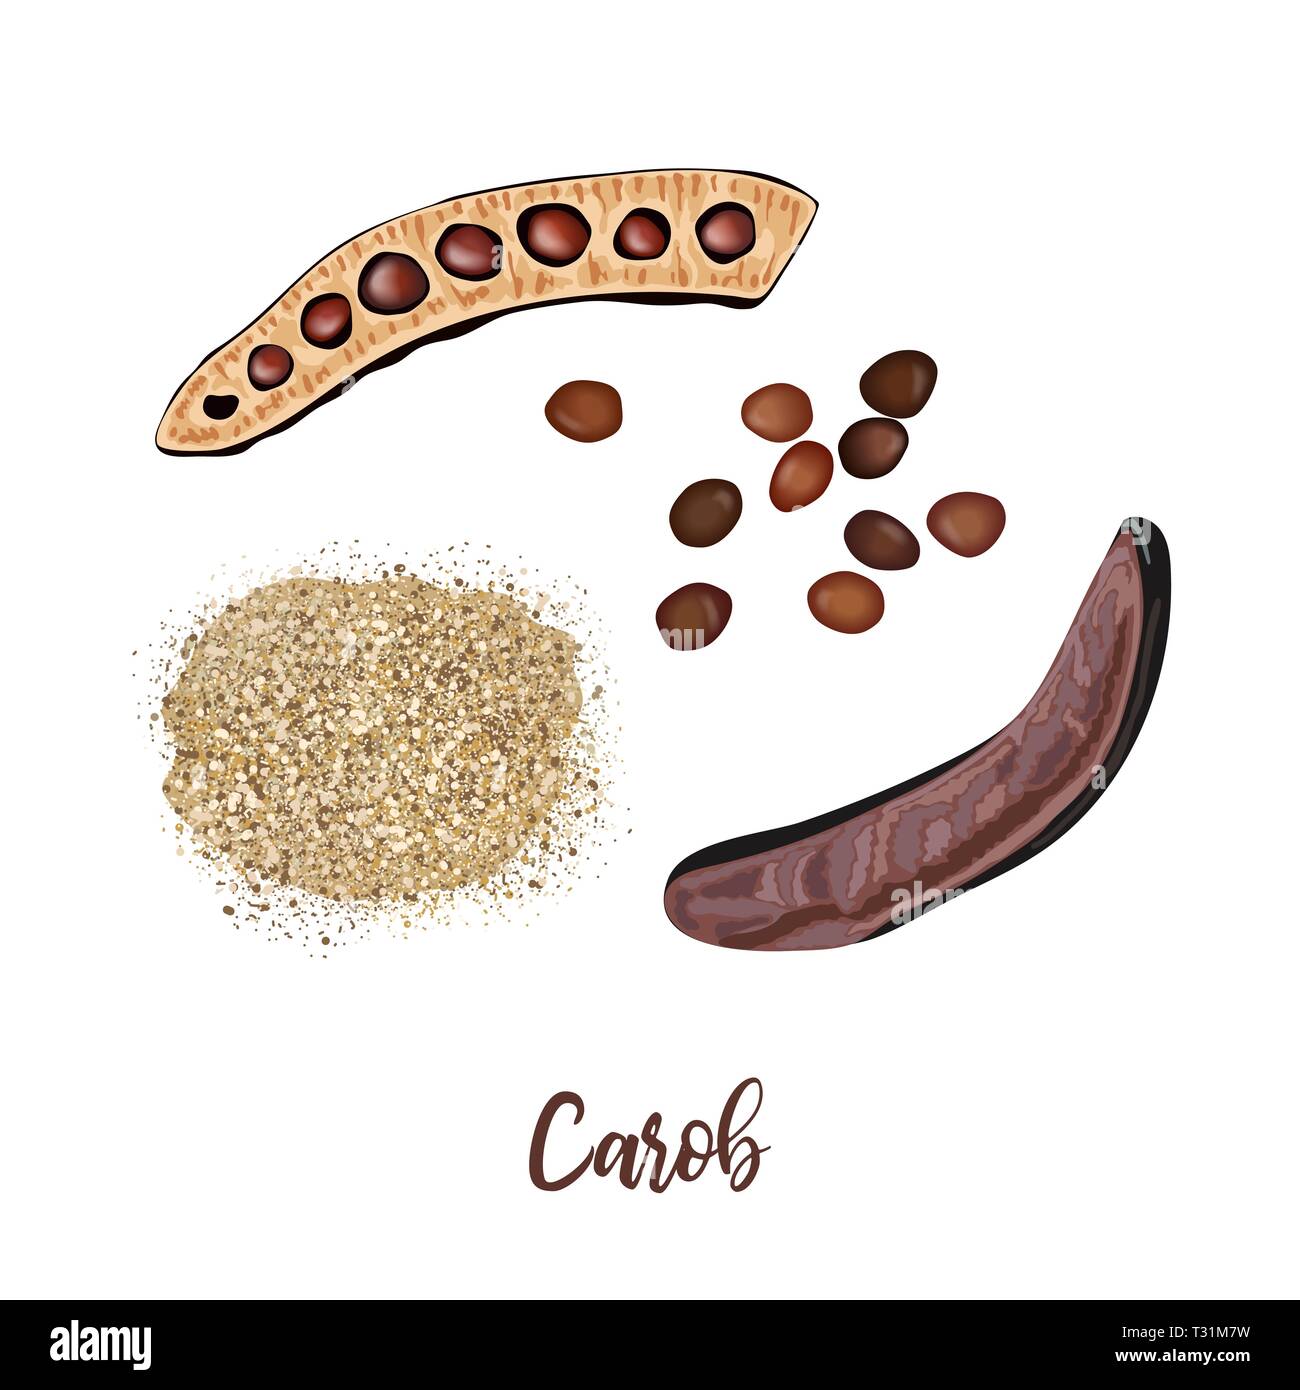 Ripe carob sweet pods whole and halved, seeds and carob powder on the white background. vector illustration Stock Vector